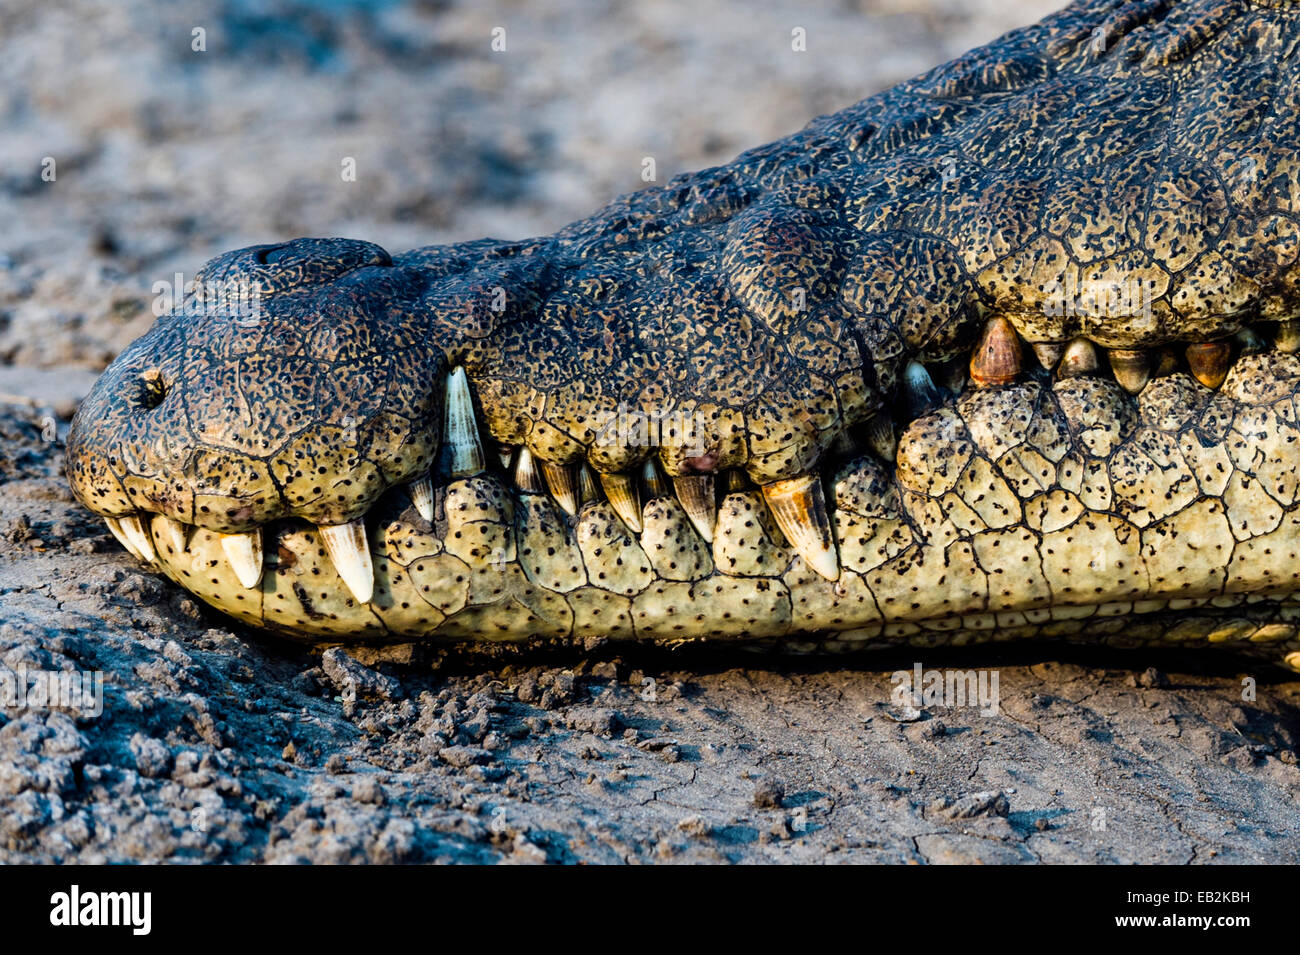 The teeth and jaws of a Nile Crocodile sun basking on the muddy bank of a river at sunset. Stock Photo